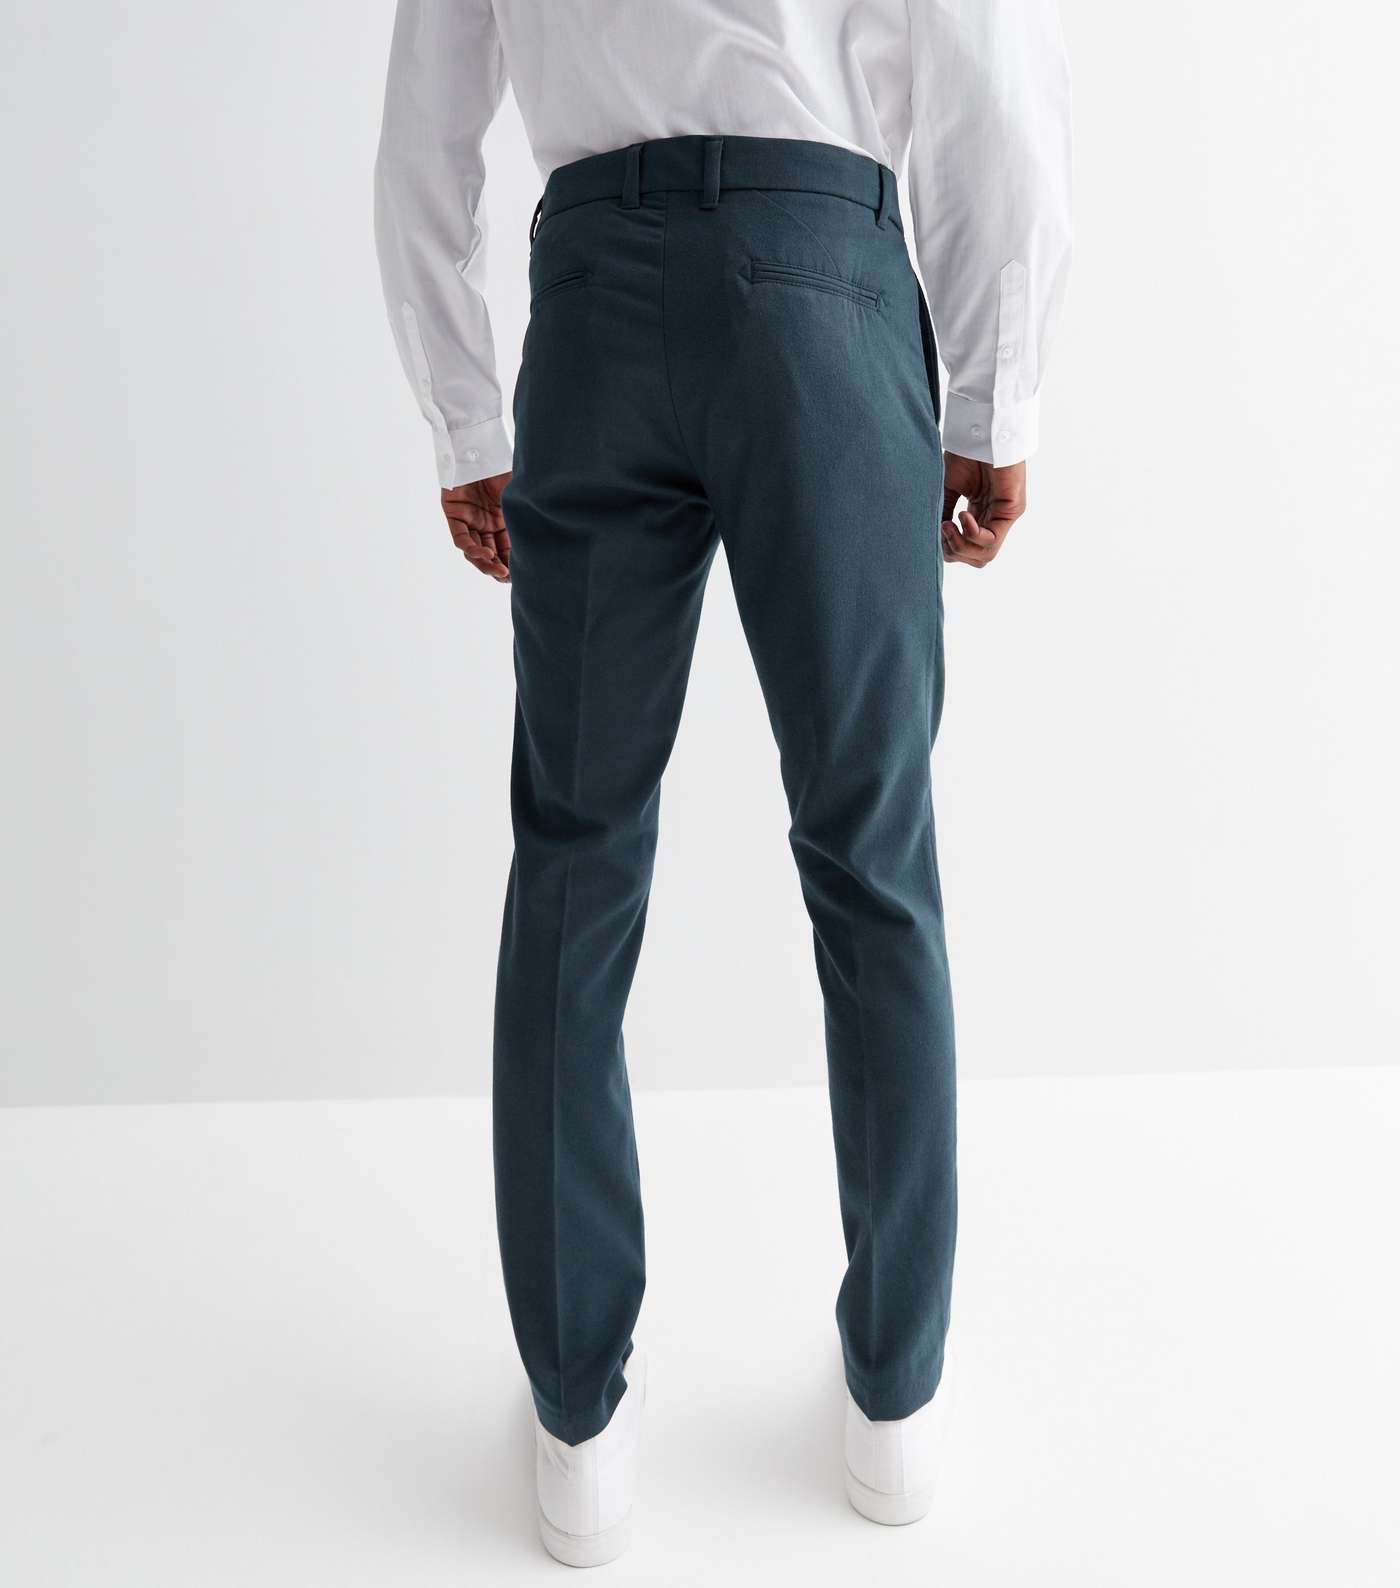 New Look skinny suit pant in bright blue